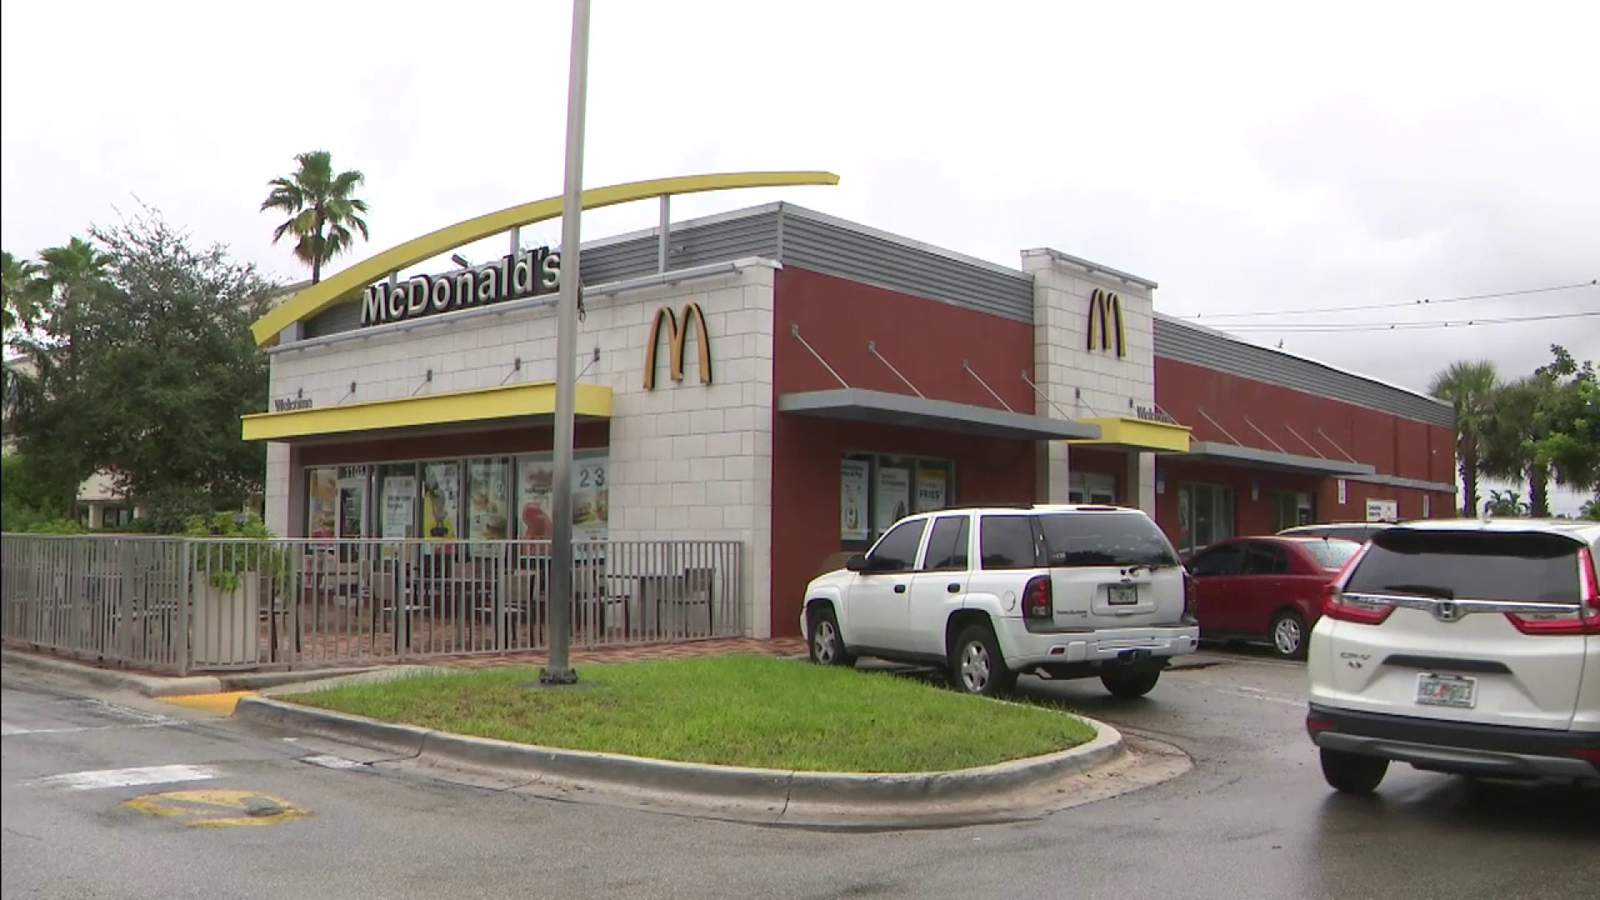 Judge rules McDonald’s cannot withhold surveillance video of attack on elderly woman in Hialeah